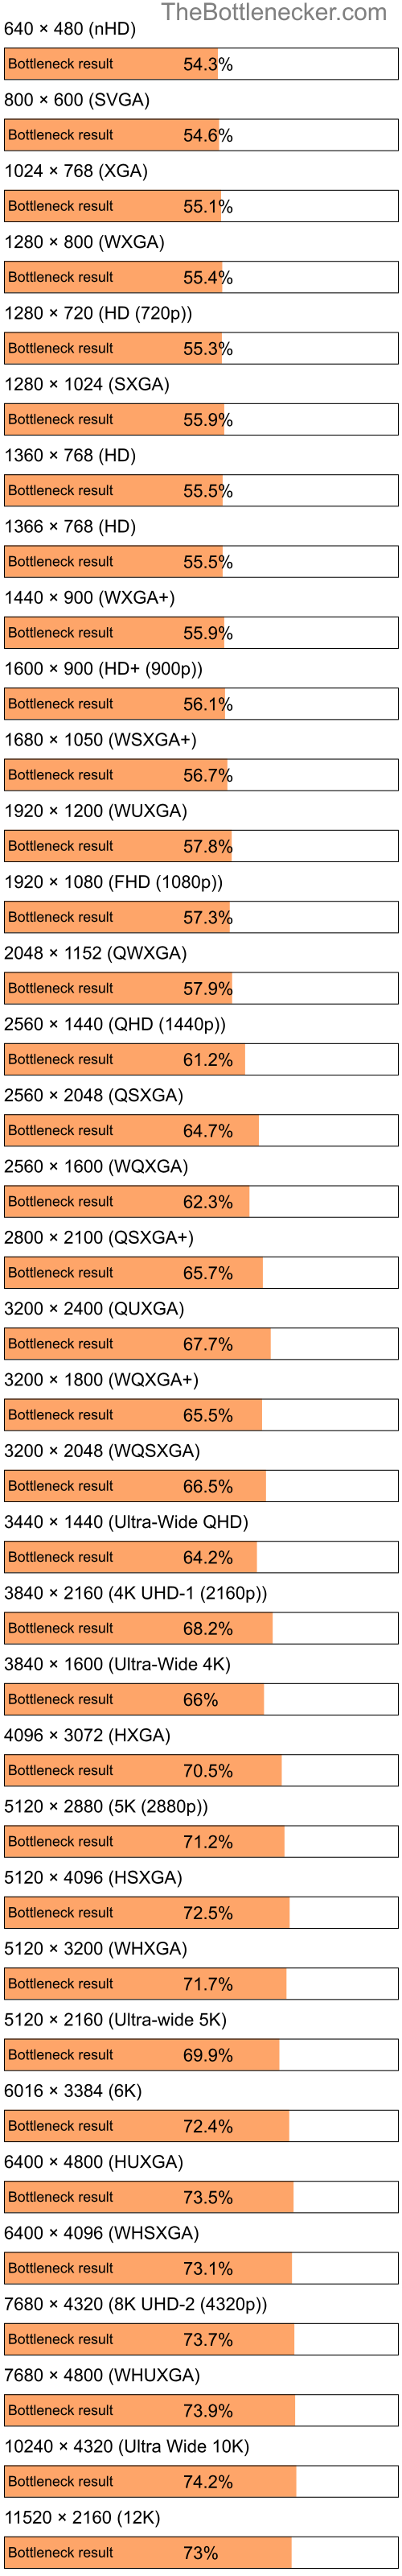 Bottleneck results by resolution for Intel Celeron and AMD Mobility Radeon X1600 in Processor Intense Tasks